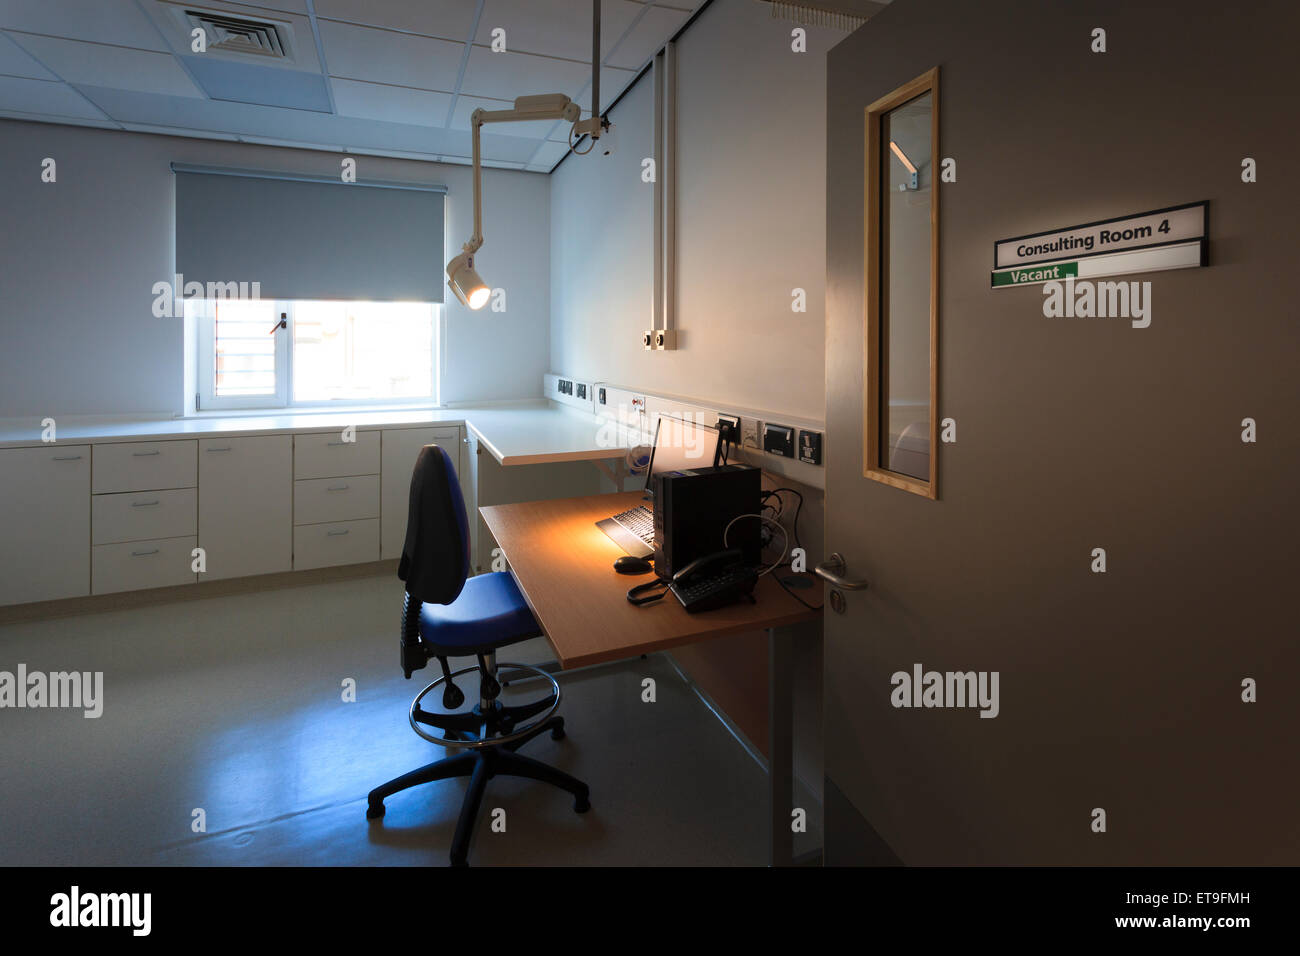 Unoccupied hospital consulting room with sign on door Stock Photo